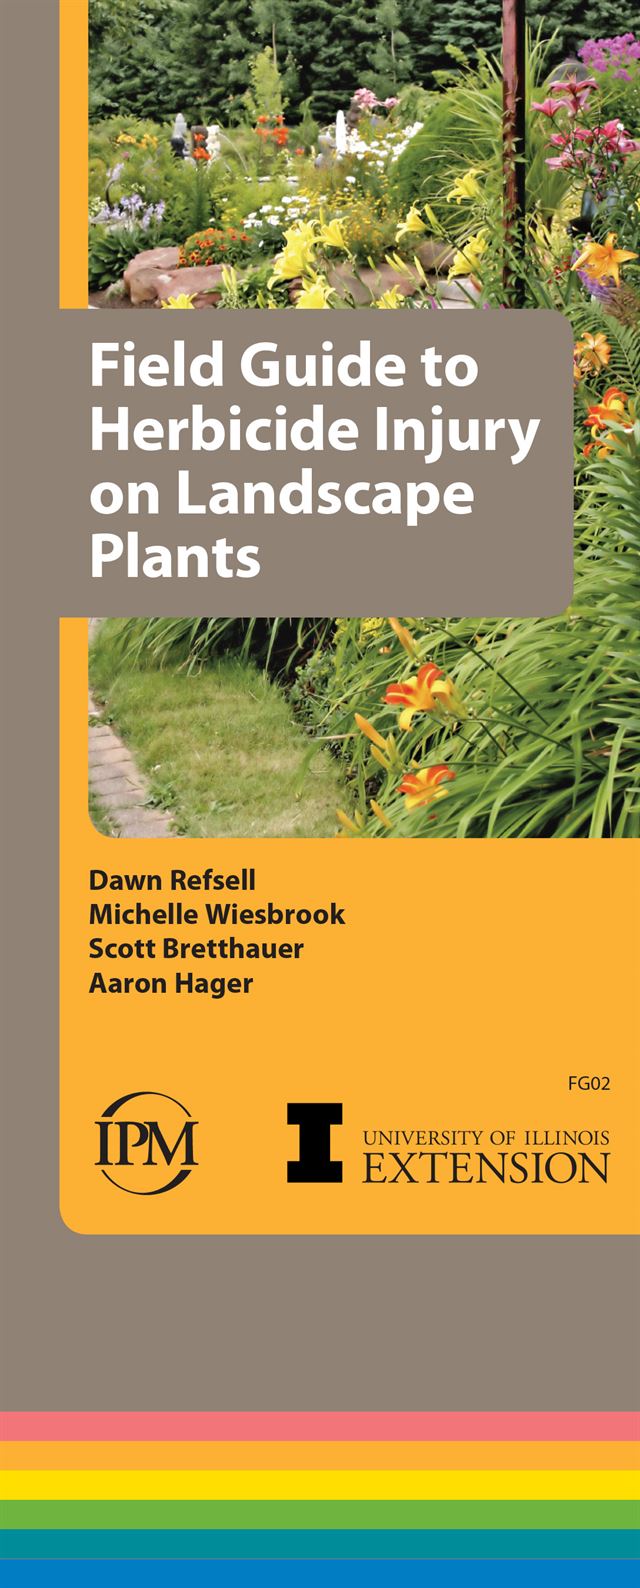 FG02 - Field Guide to Herbicide Injury on Landscape Plants